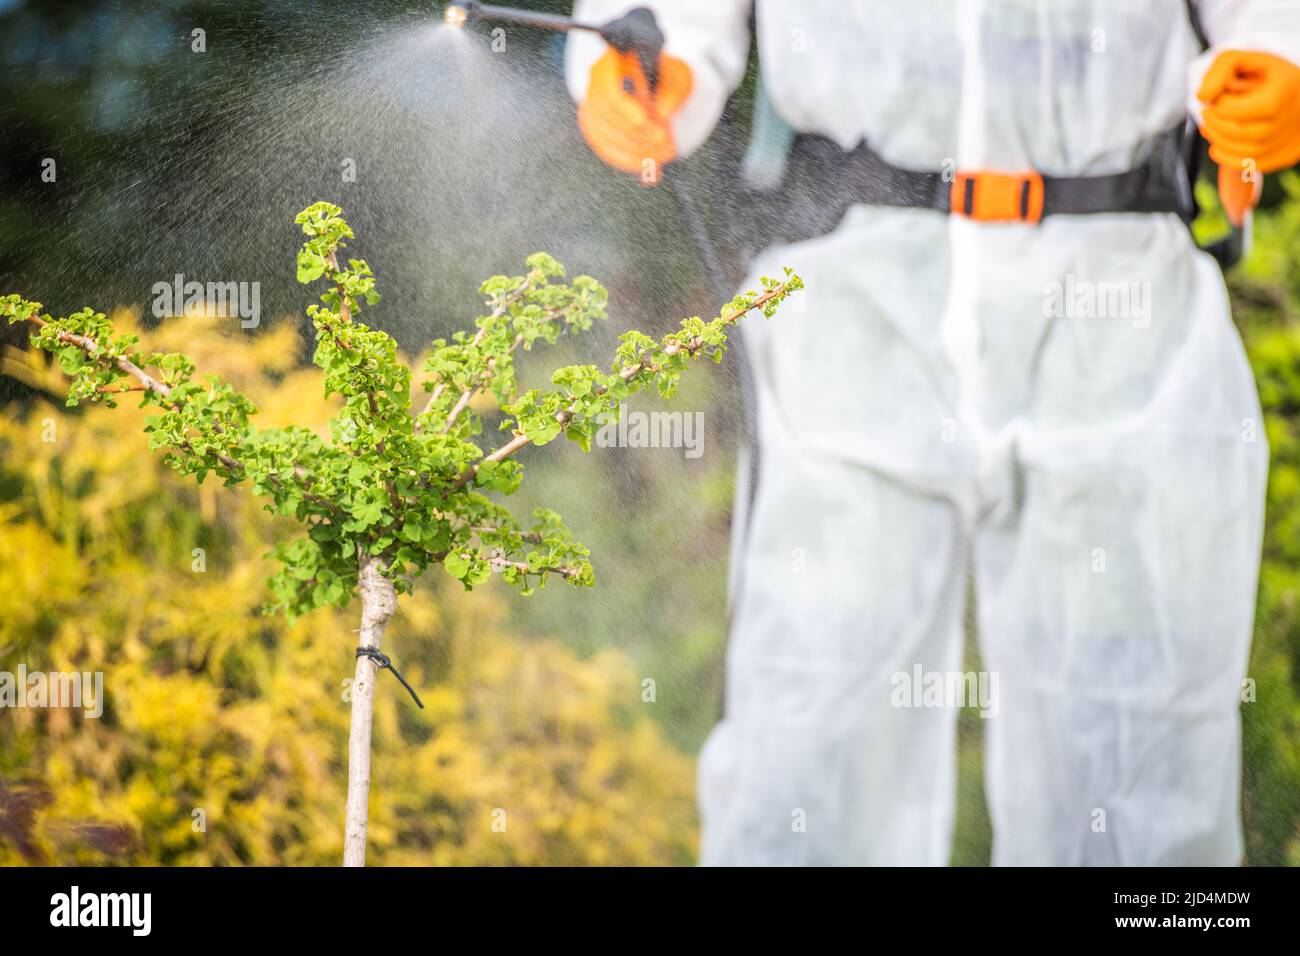 Professional Gardener in Special Protective Clothing Spraying Pesticides on Plants in the Backyard Garden. Garden Care and Maintenance Theme. Stock Photo